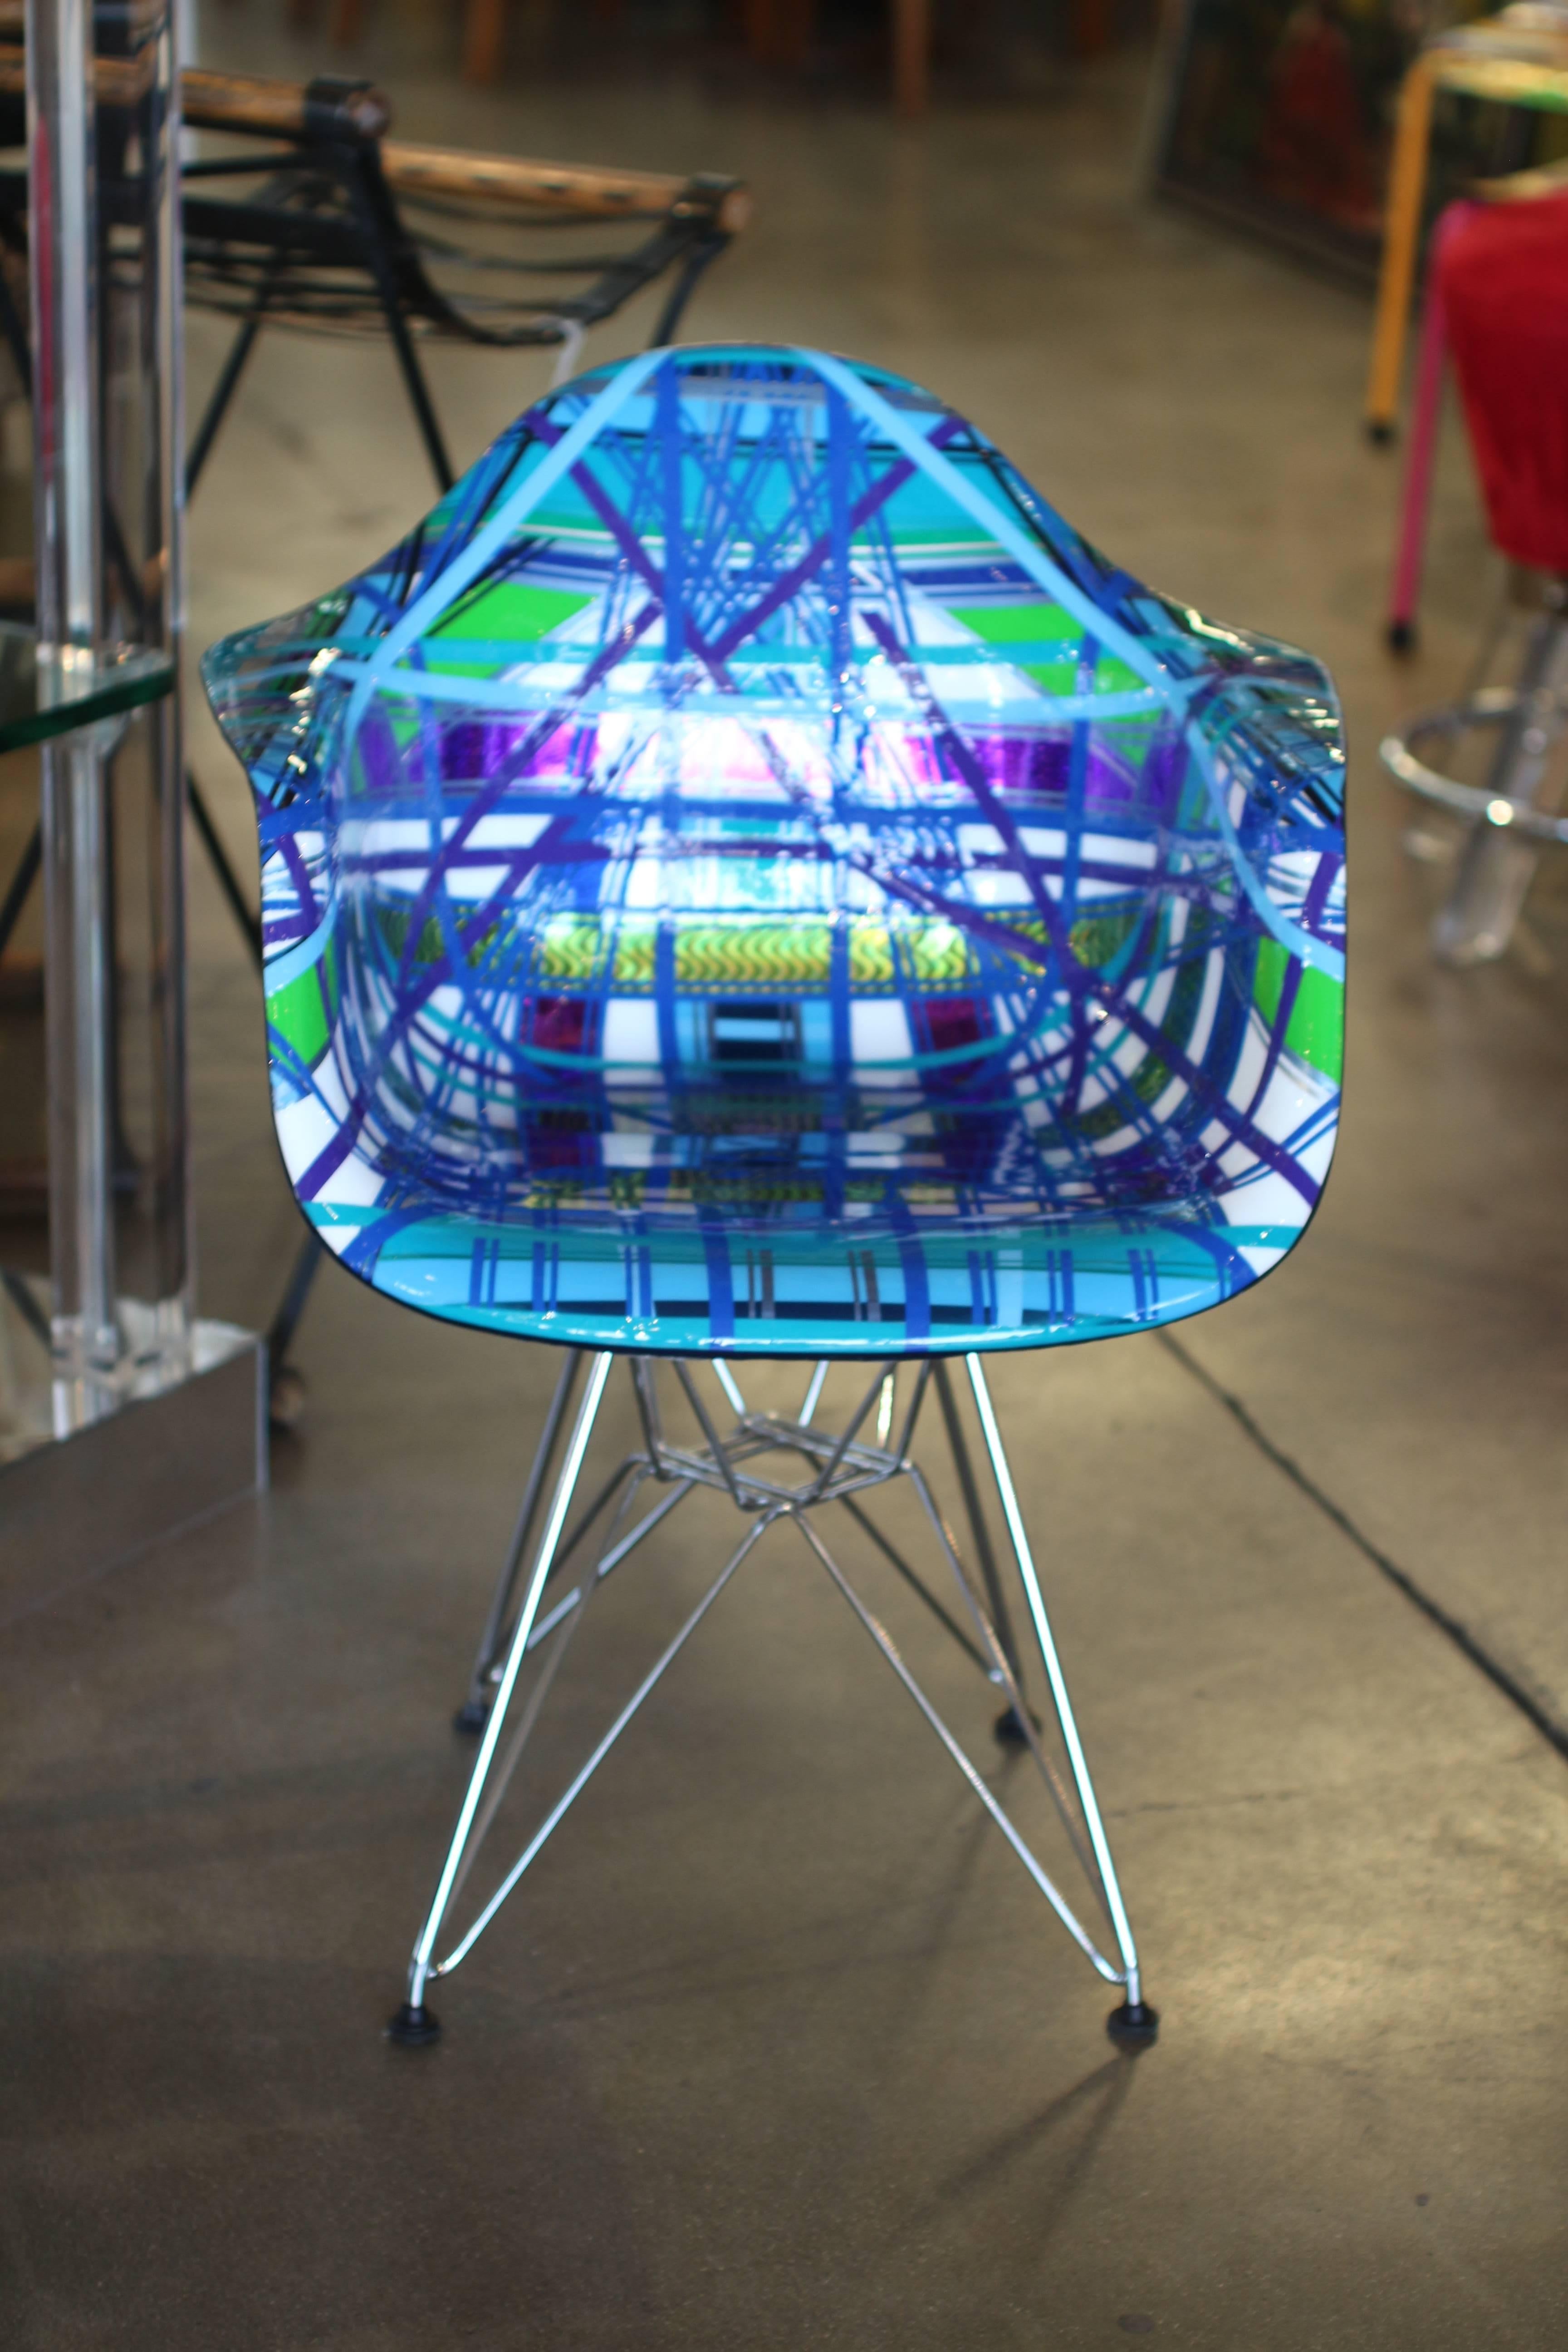 A wonderfully decorated chair by the noted Brazilian American artist Mauro Oliveira. This chair is titled 